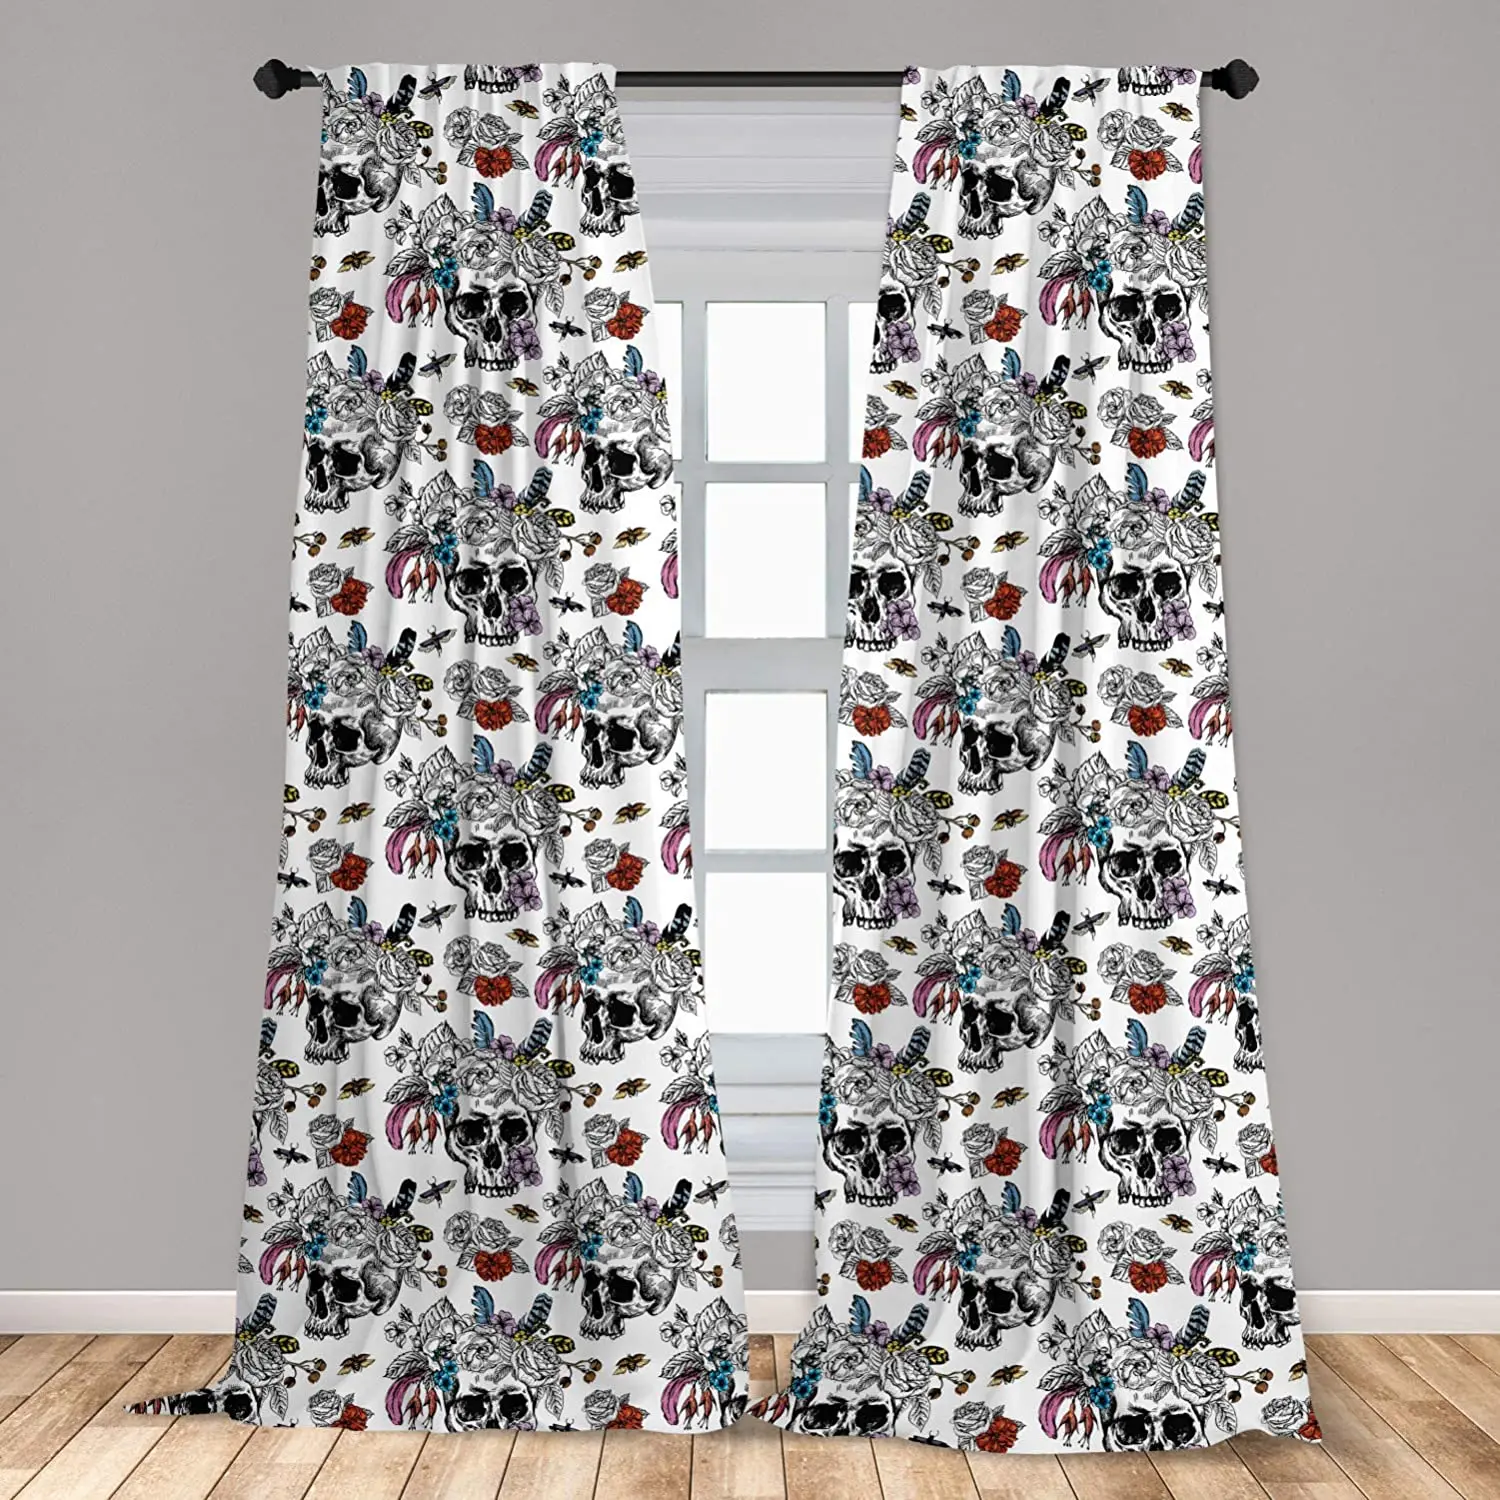 Gothic Window Curtains Day of The Dead Inspired Human Skulls Design with Colorful Flowers Mexican Tradition Curtain